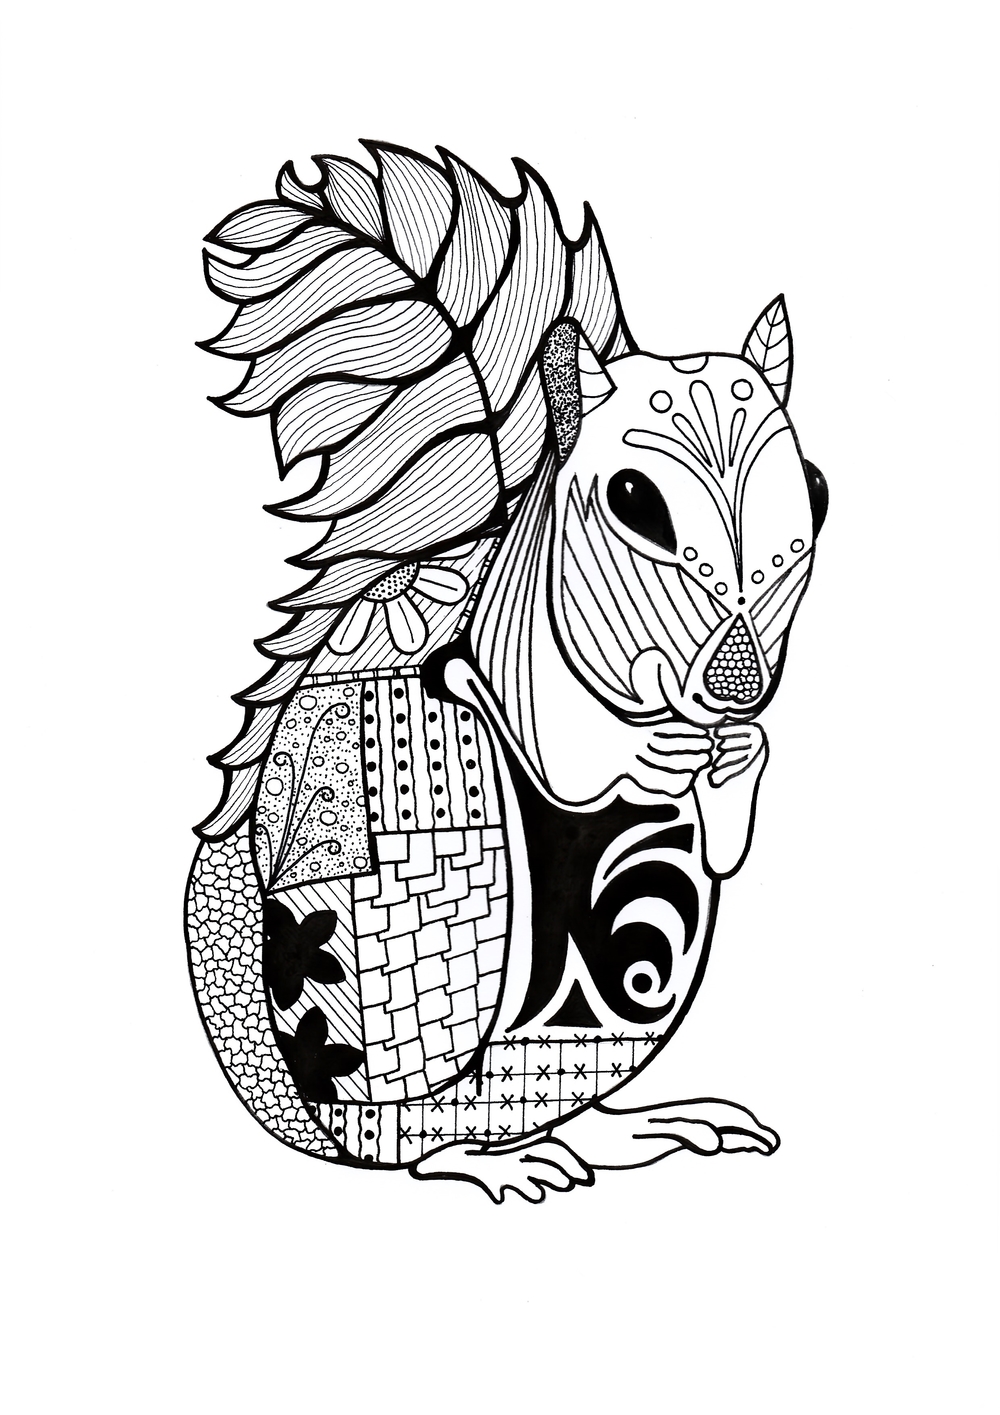 Download Intricate Squirrel Adult Coloring Page | FaveCrafts.com